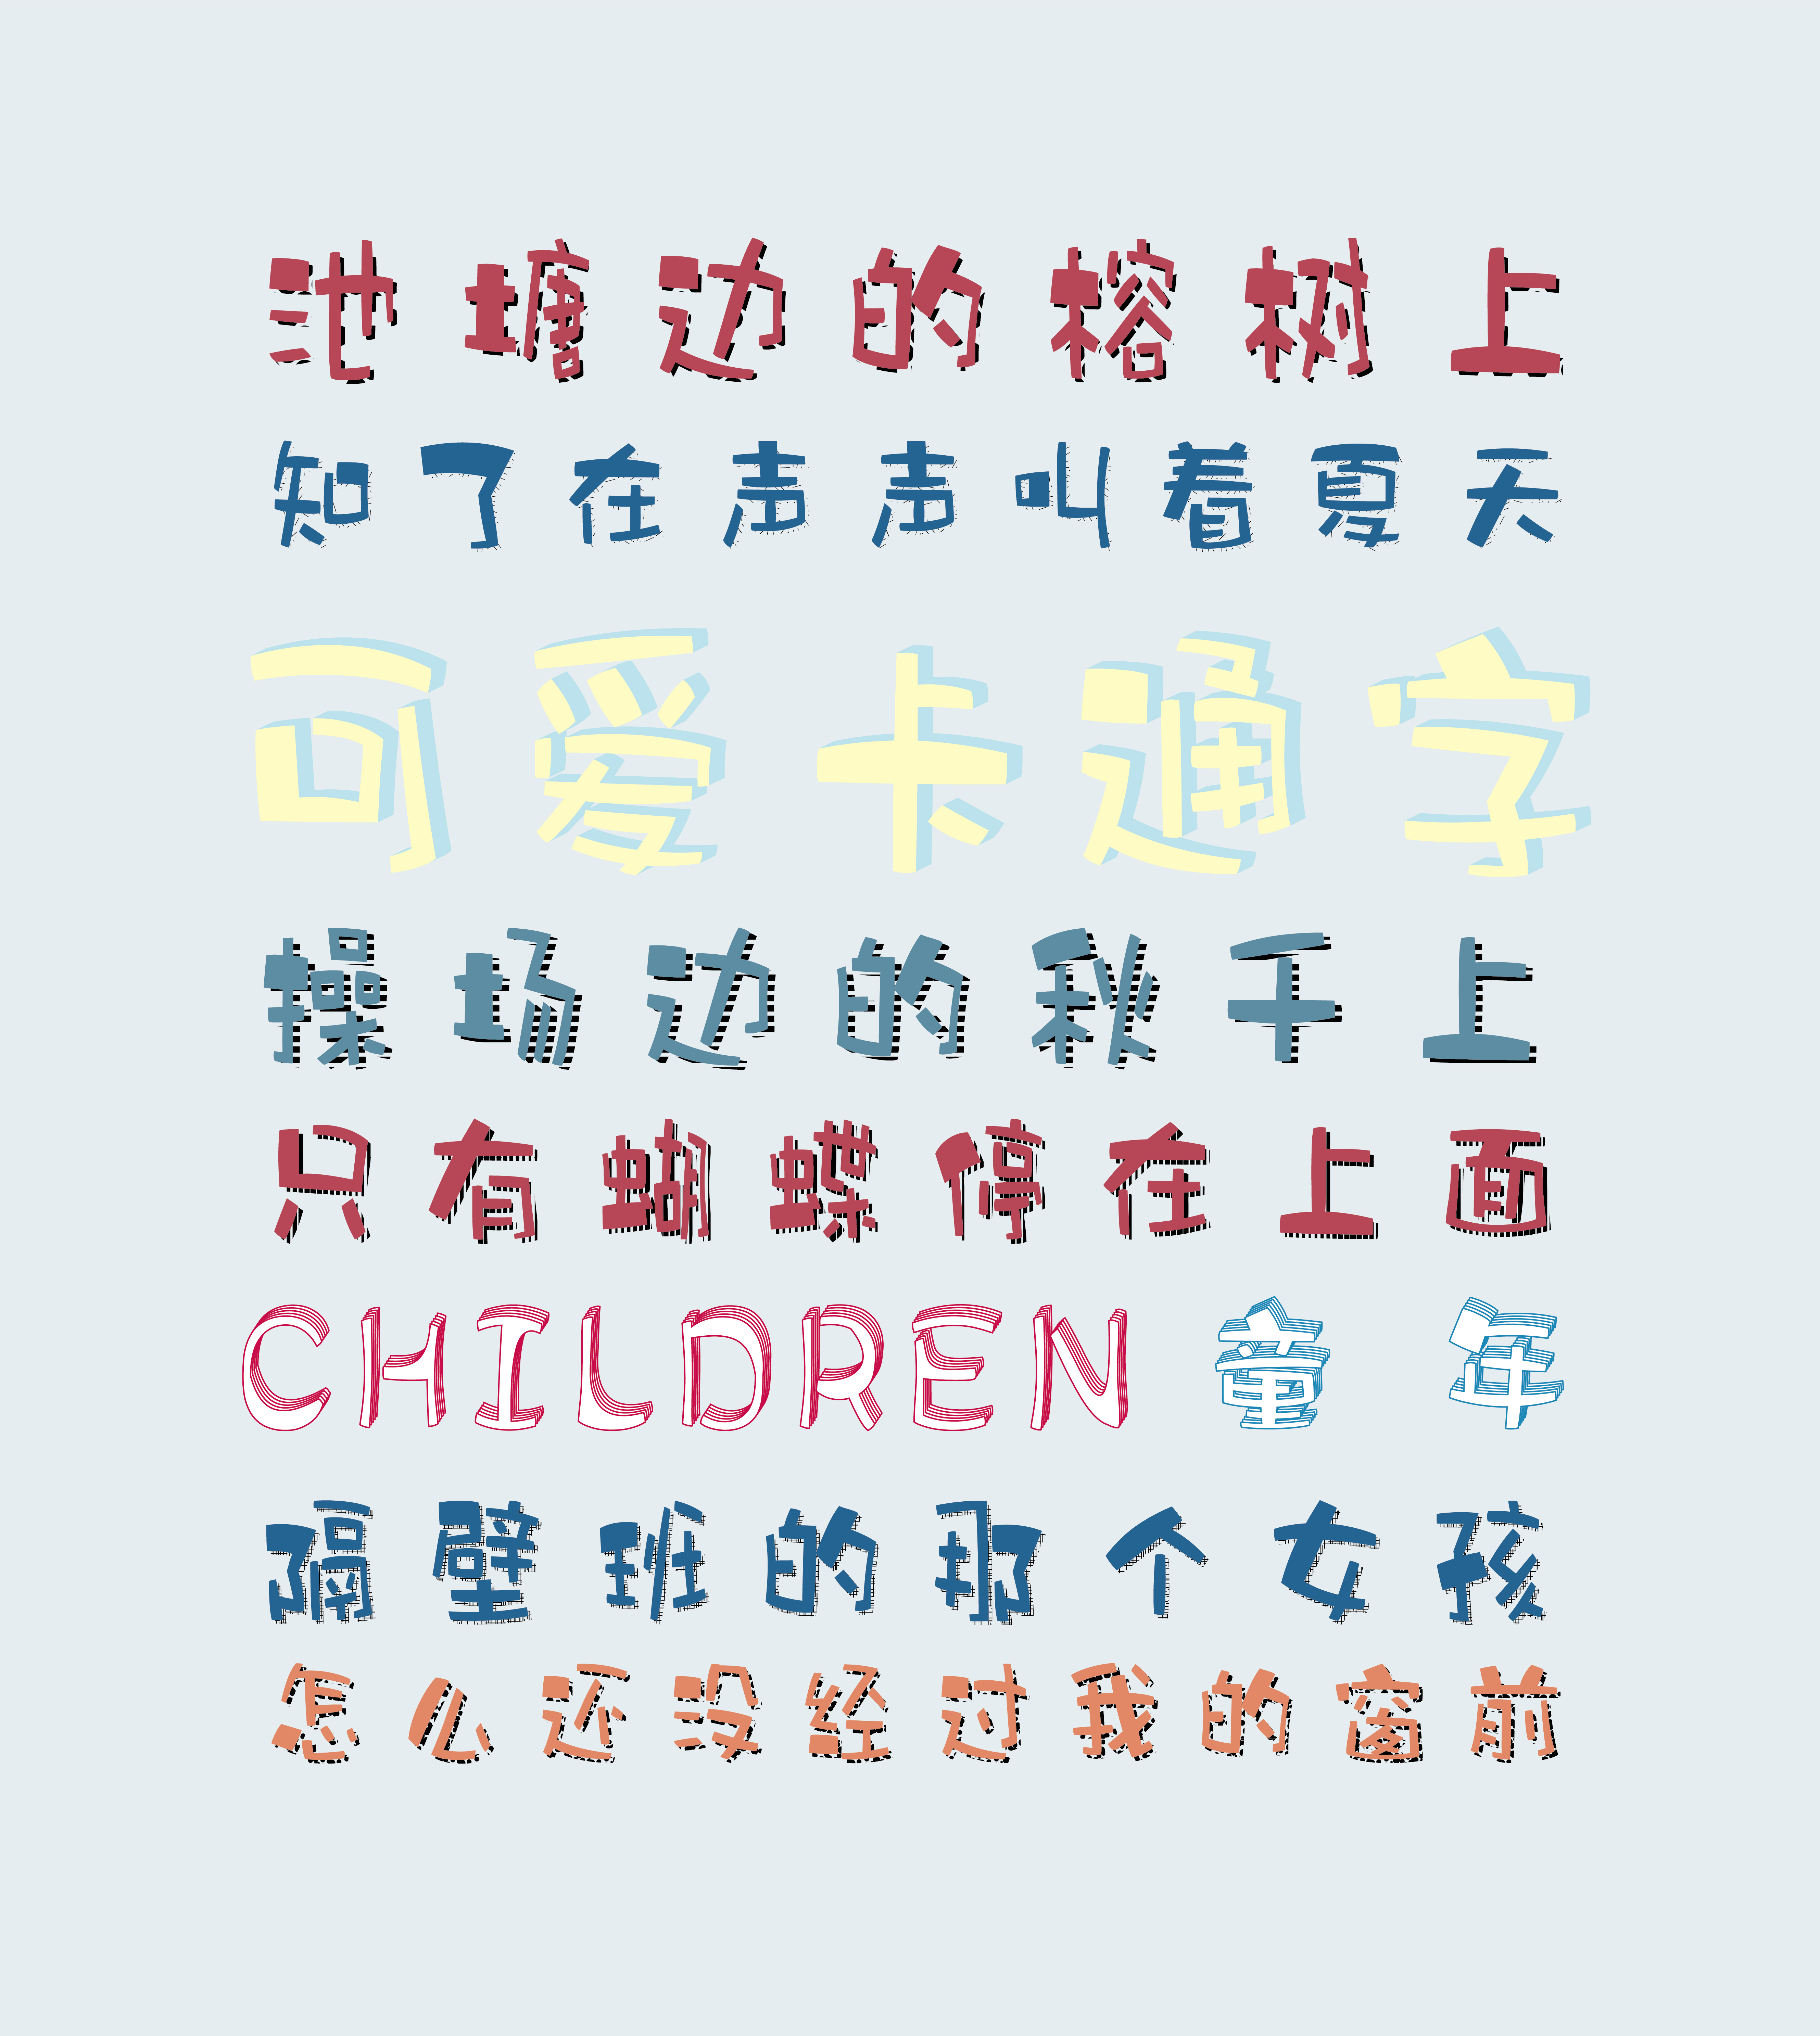 For children, lovely, cartoon-oriented fonts